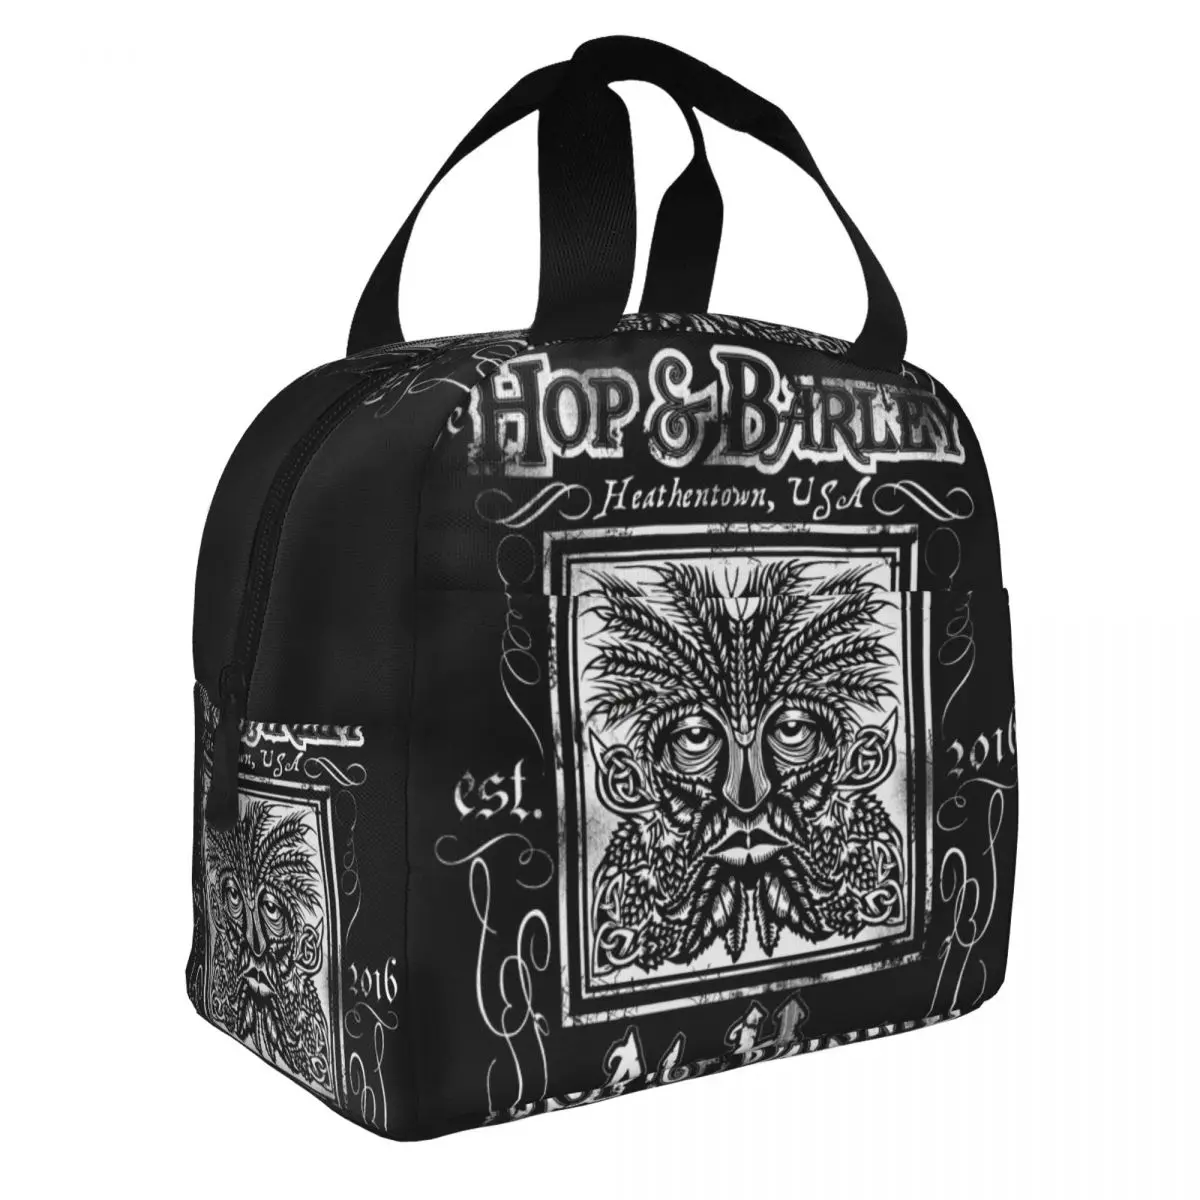 The Hop & Barley Ale Haus Lunch Bento Bags Portable Aluminum Foil thickened Thermal Cloth Lunch Bag for Women Men Boy